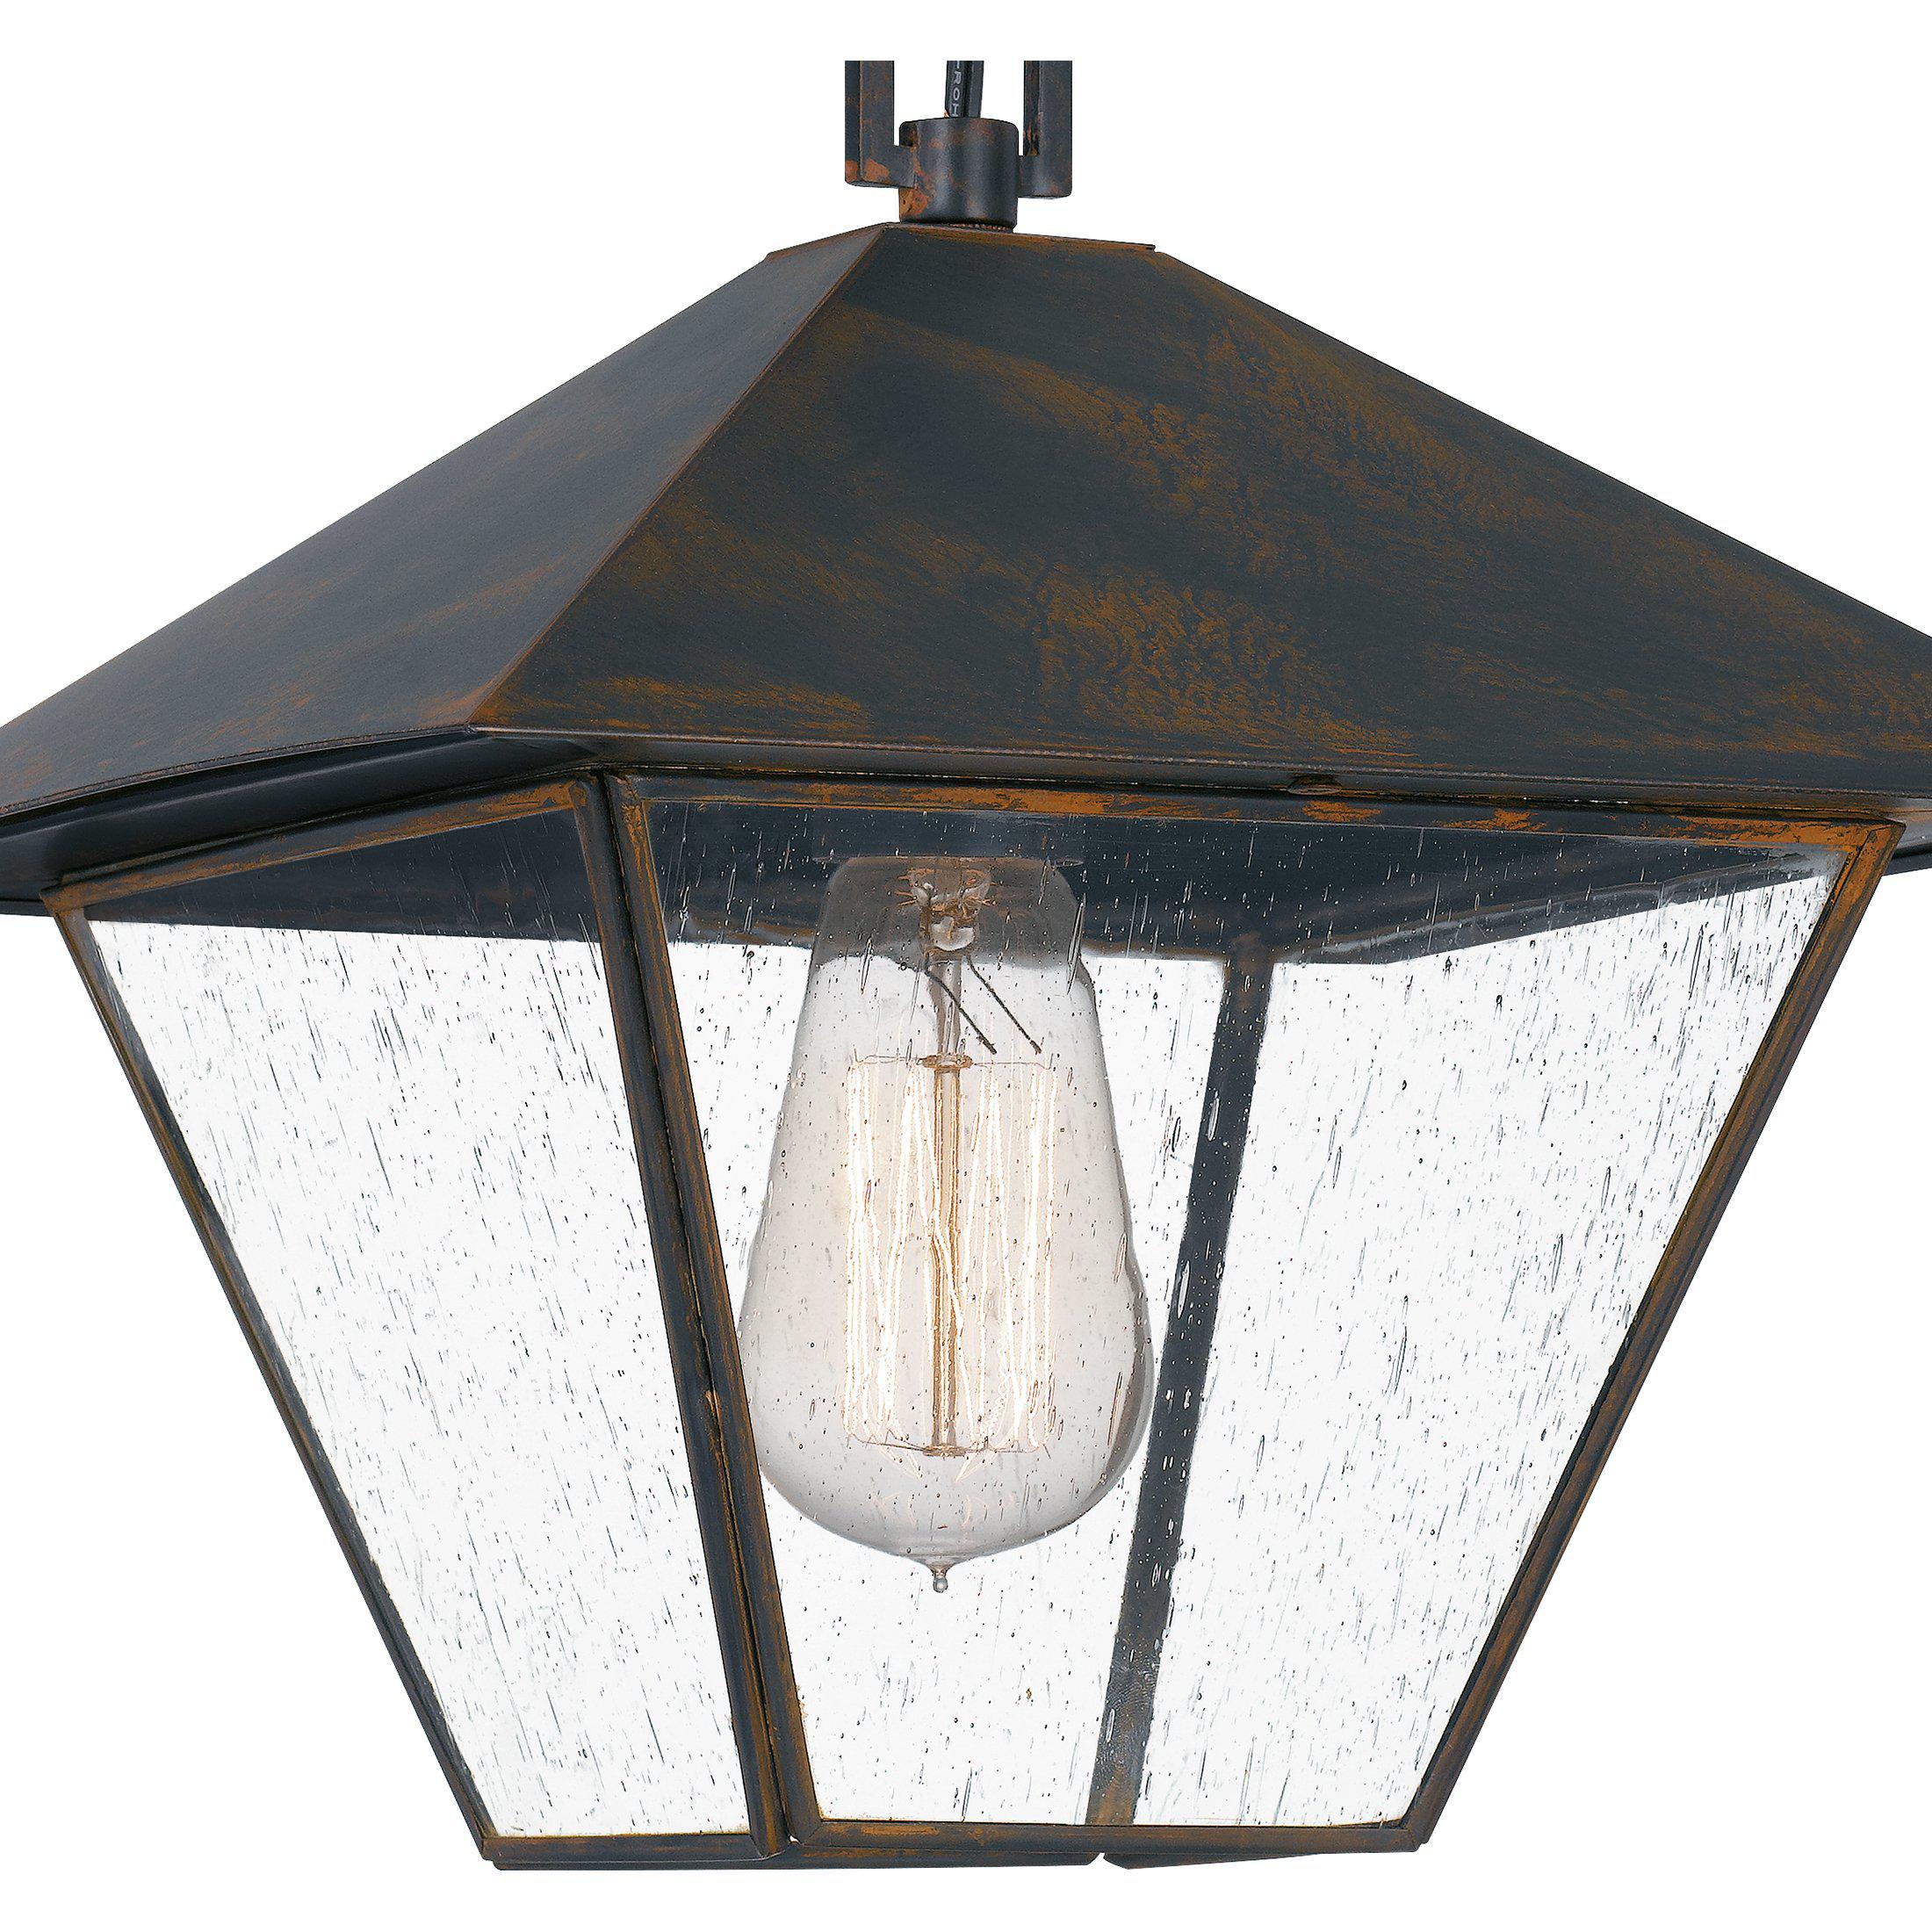 Quoizel Corporal Outdoor Lantern, Hanging